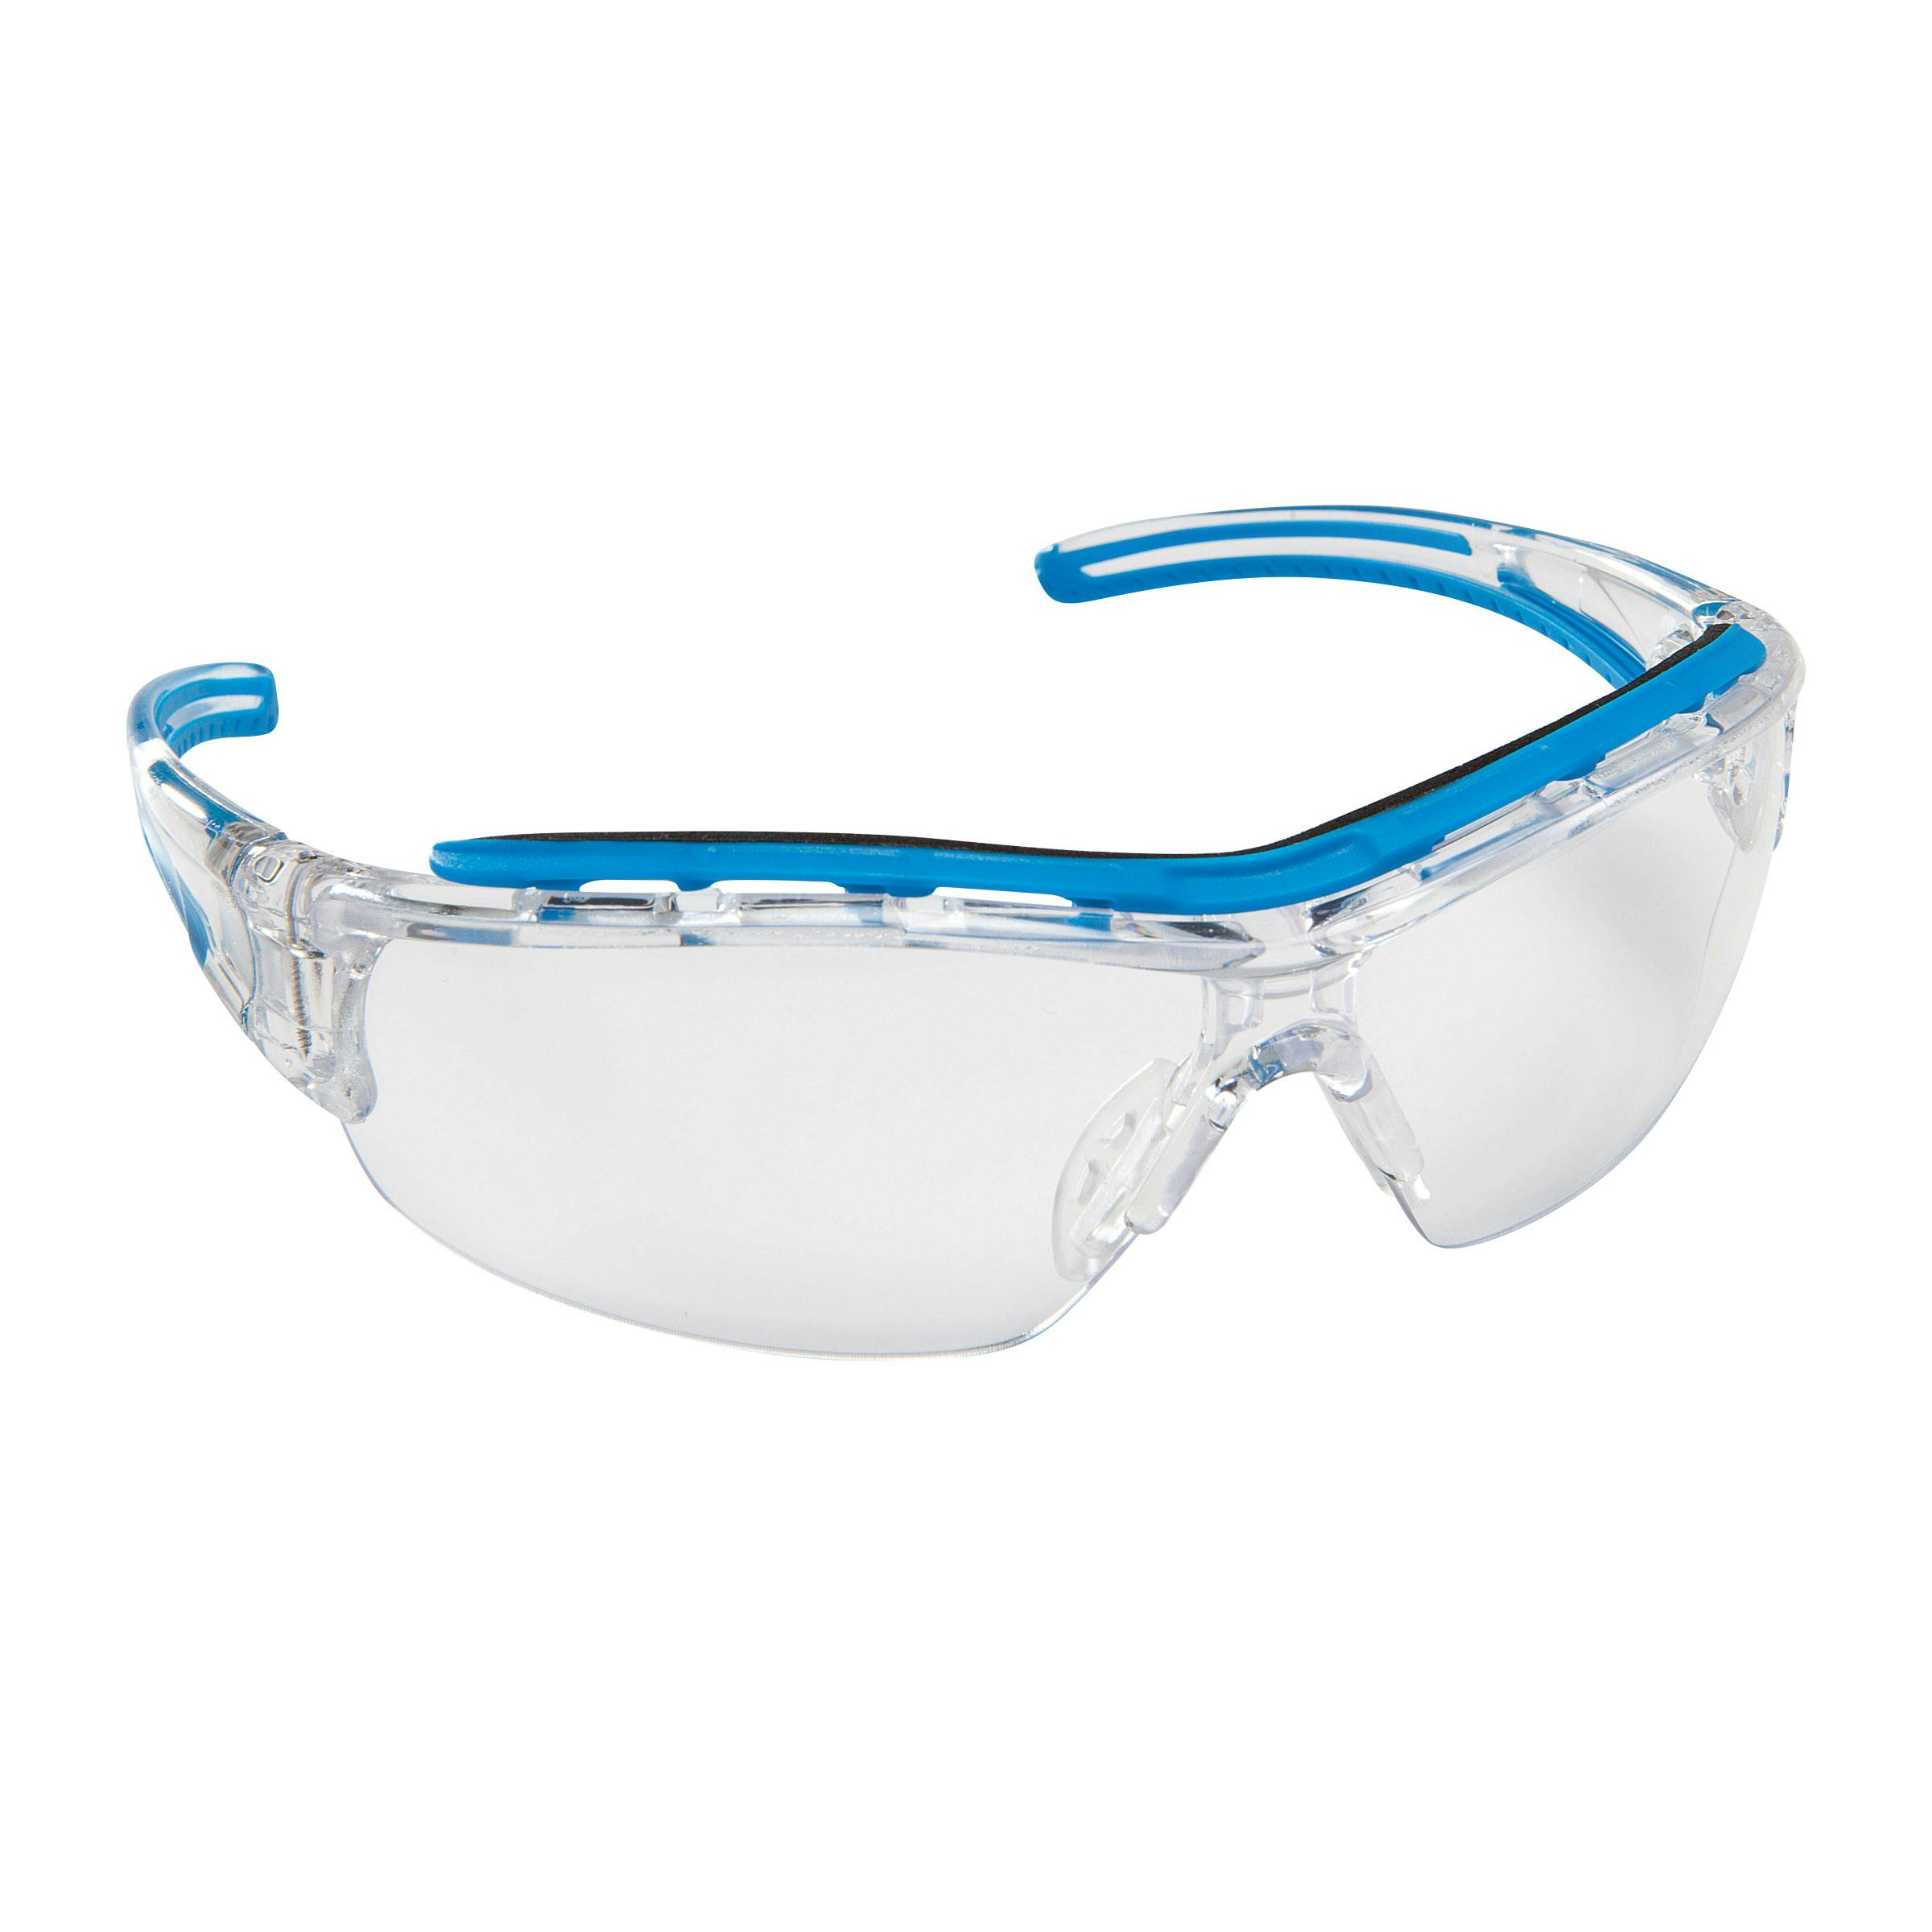 Force360 Shield Safety Spectacle